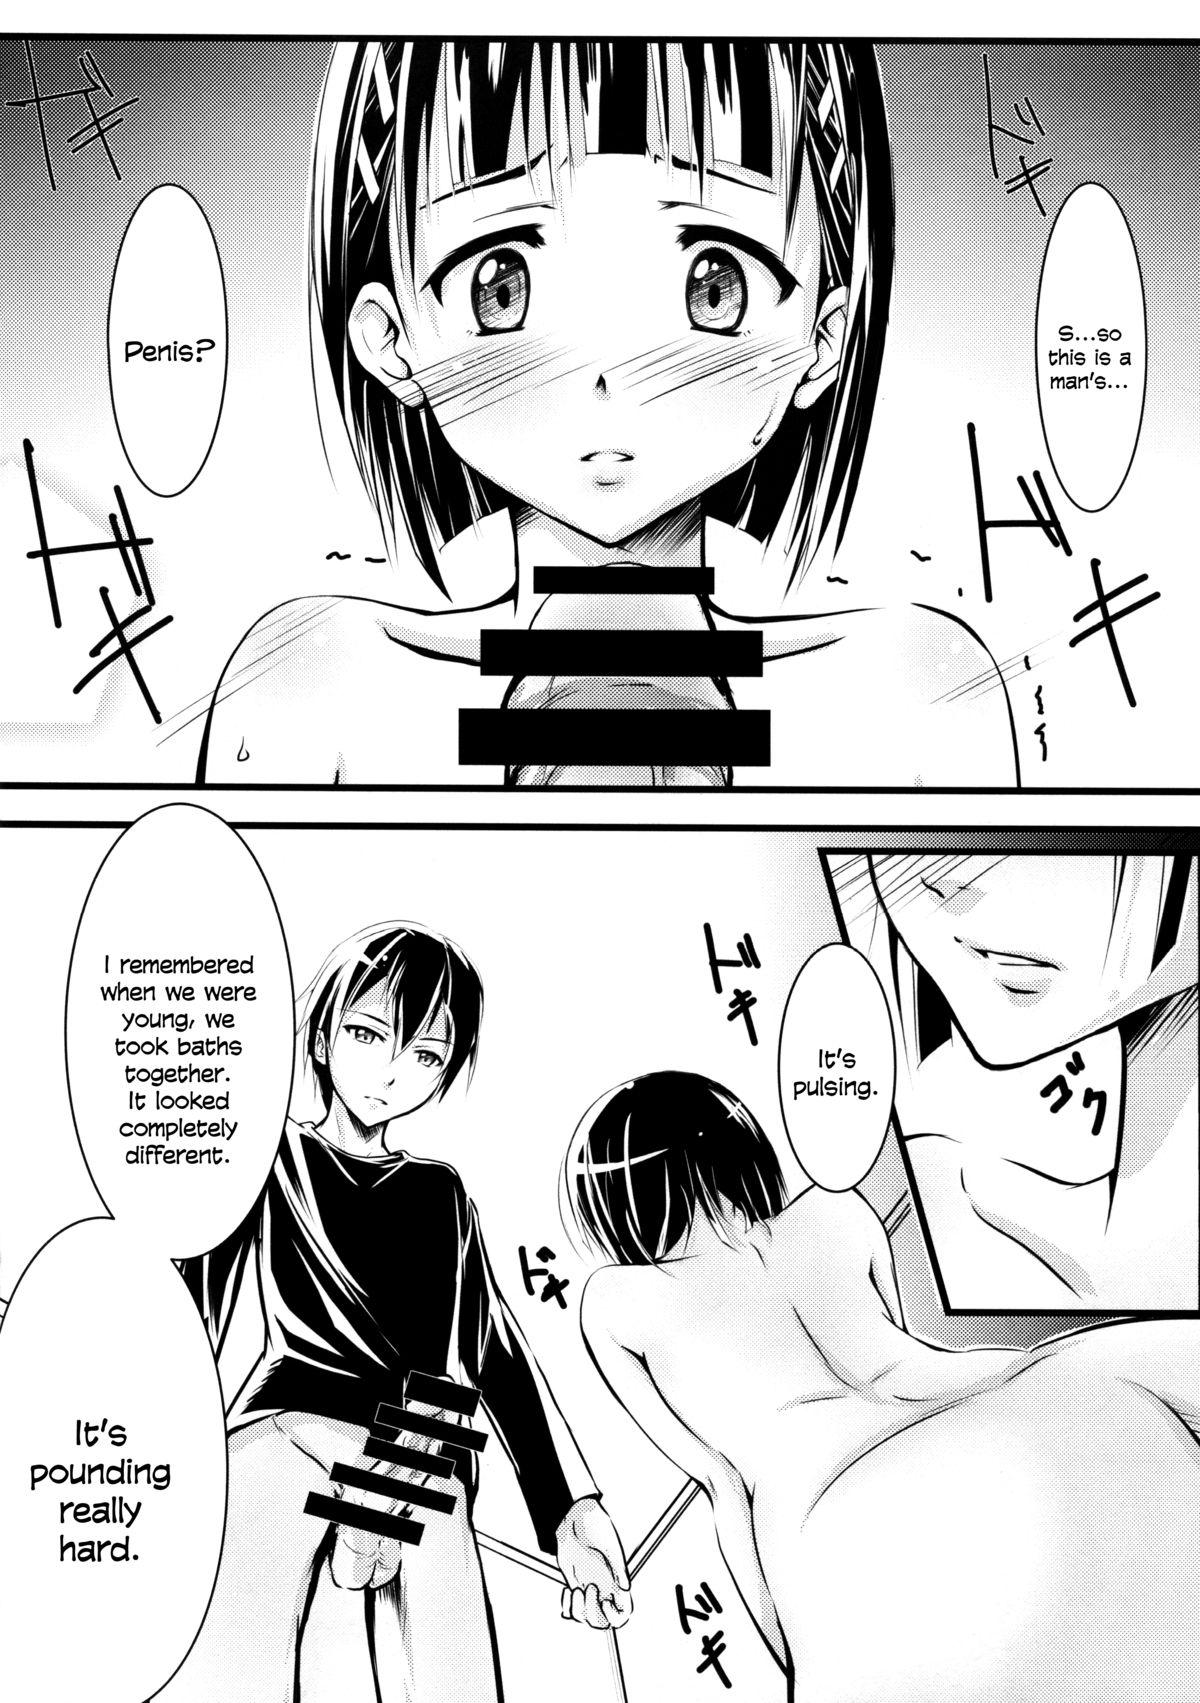 Home Suguha - Sword art online Clothed - Page 5